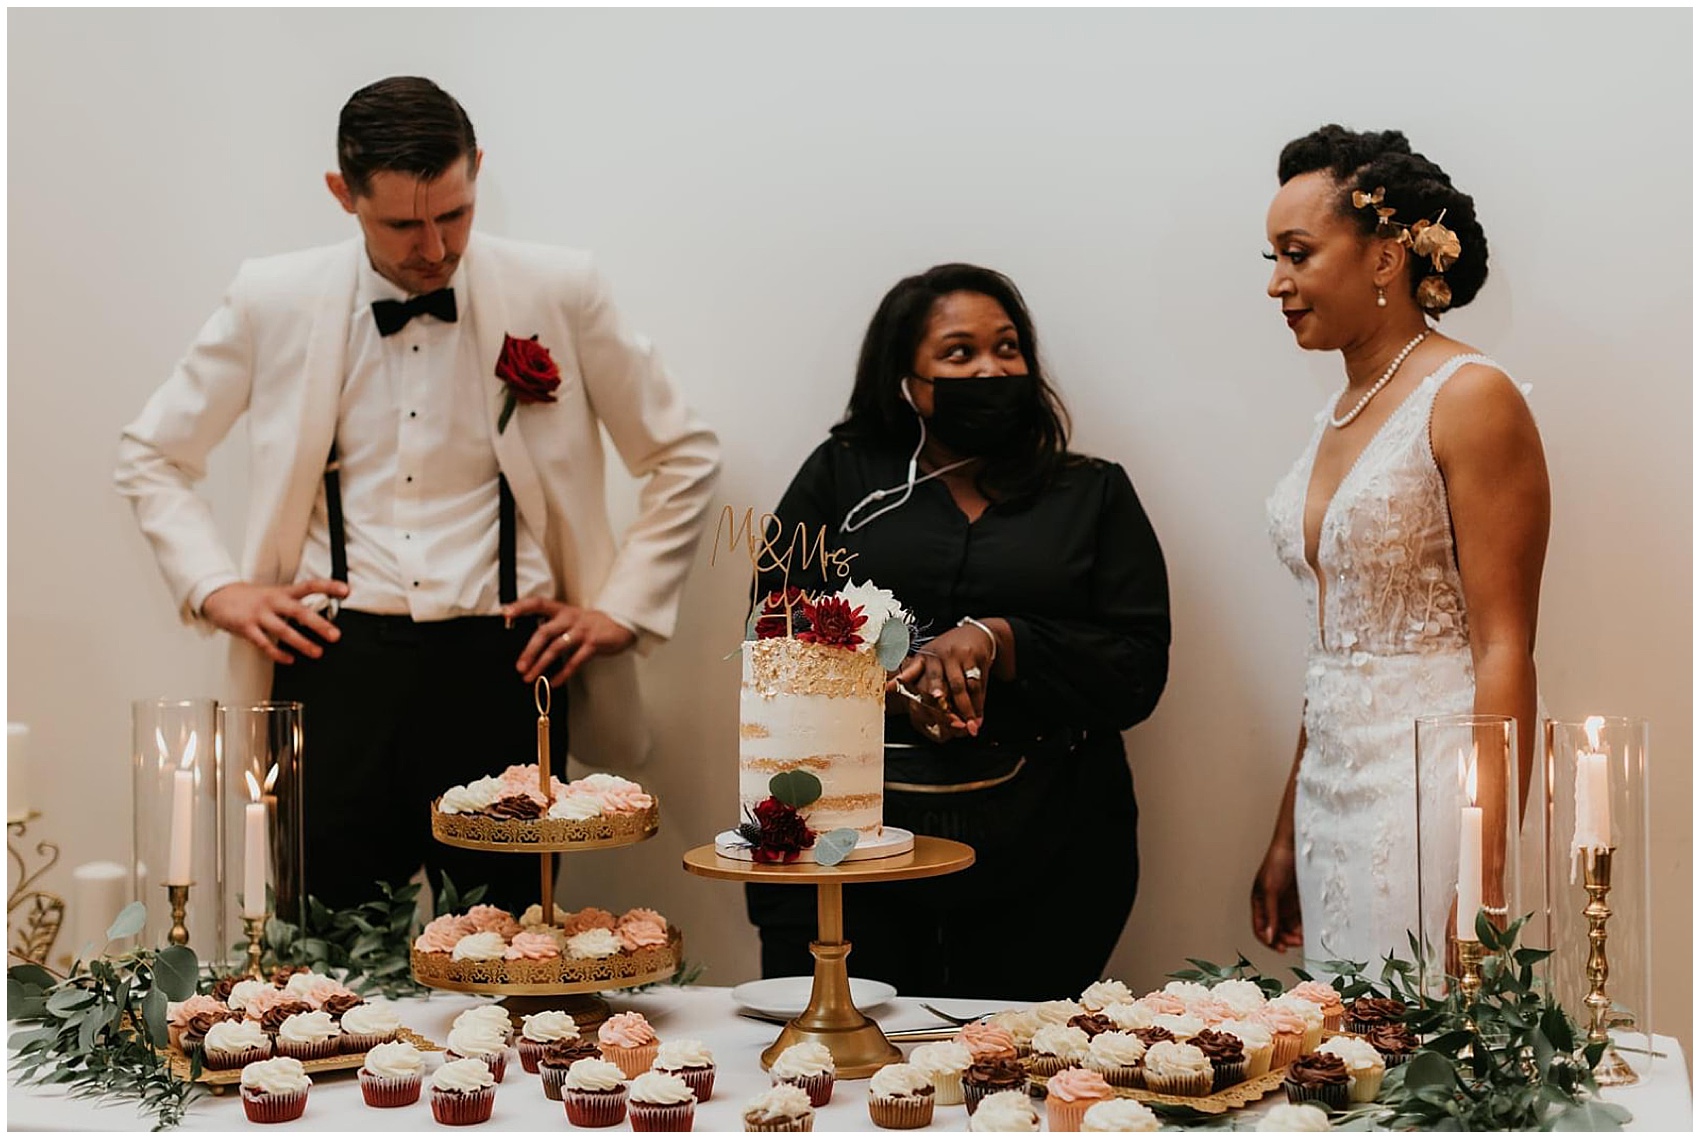 Wedding planner in black clothes teaches newlyweds how to cut their cake PLS Coordinate